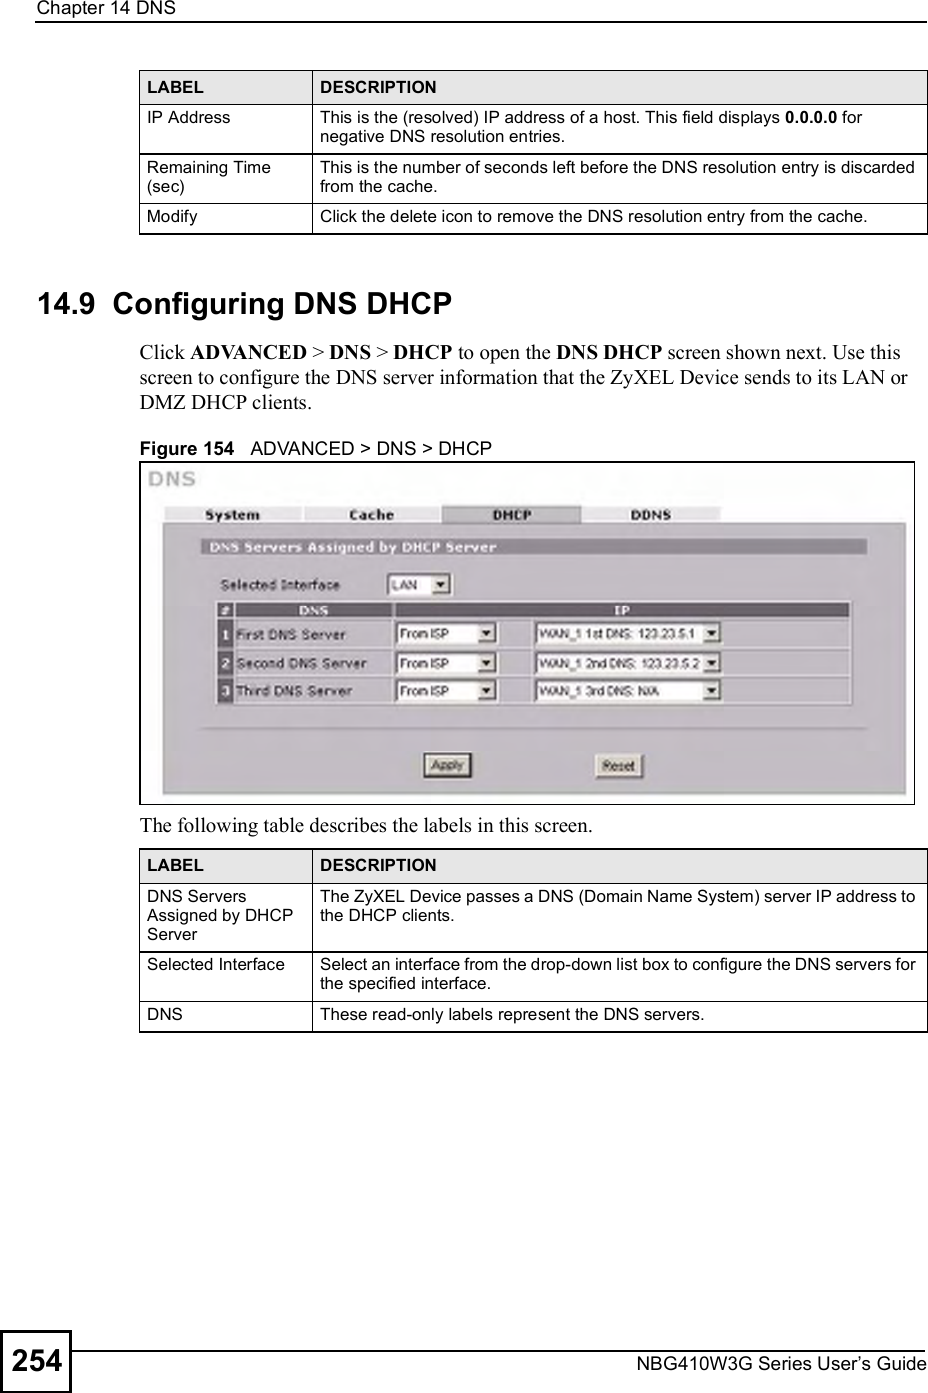 Chapter 14DNSNBG410W3G Series User s Guide25414.9  Configuring DNS DHCP Click ADVANCED &gt; DNS &gt; DHCP to open the DNS DHCP screen shown next. Use this screen to configure the DNS server information that the ZyXEL Device sends to its LAN or DMZ DHCP clients.Figure 154   ADVANCED &gt; DNS &gt; DHCPThe following table describes the labels in this screen.IP AddressThis is the (resolved) IP address of a host. This field displays 0.0.0.0 for negative DNS resolution entries.Remaining Time (sec)This is the number of seconds left before the DNS resolution entry is discarded from the cache.ModifyClick the delete icon to remove the DNS resolution entry from the cache.LABEL DESCRIPTIONLABEL DESCRIPTIONDNS Servers Assigned by DHCP ServerThe ZyXEL Device passes a DNS (Domain Name System) server IP address to the DHCP clients. Selected InterfaceSelect an interface from the drop-down list box to configure the DNS servers for the specified interface.DNSThese read-only labels represent the DNS servers.